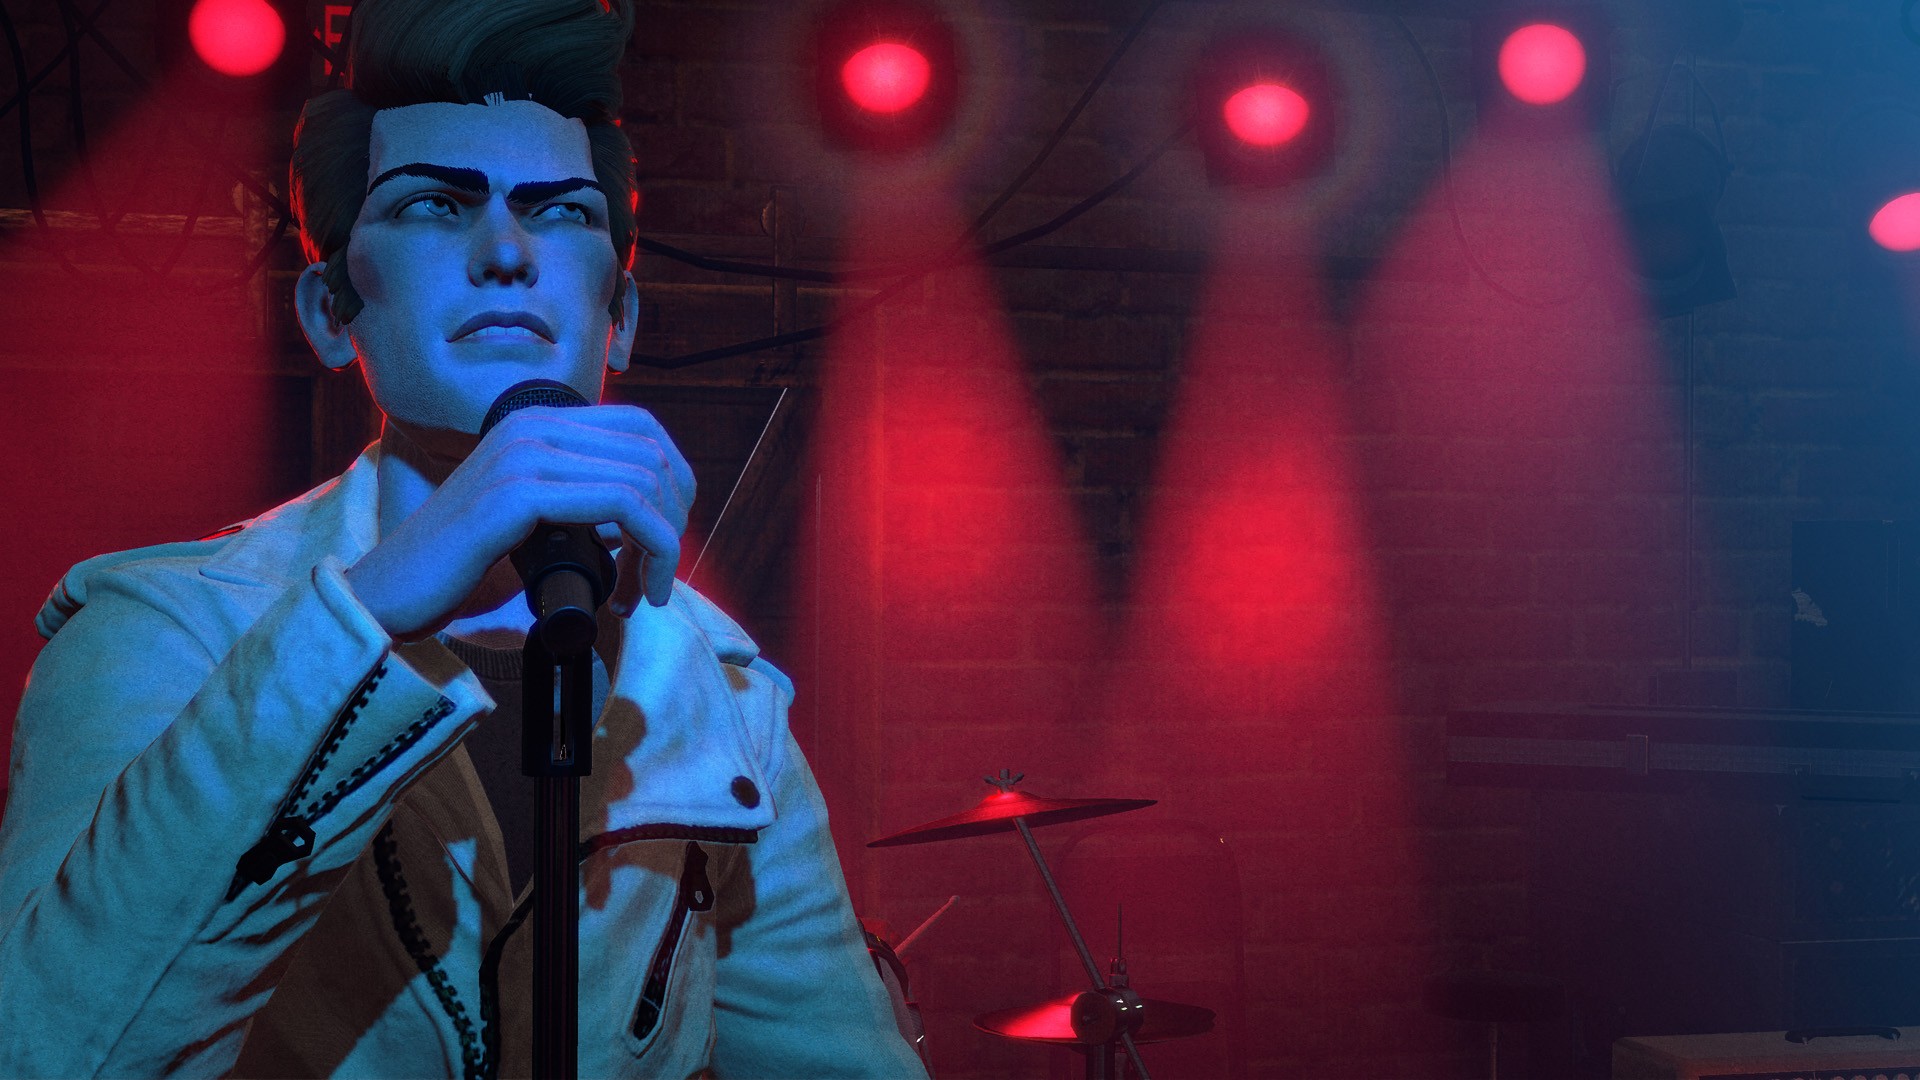 A singer crooning on stage in Rock Band 4